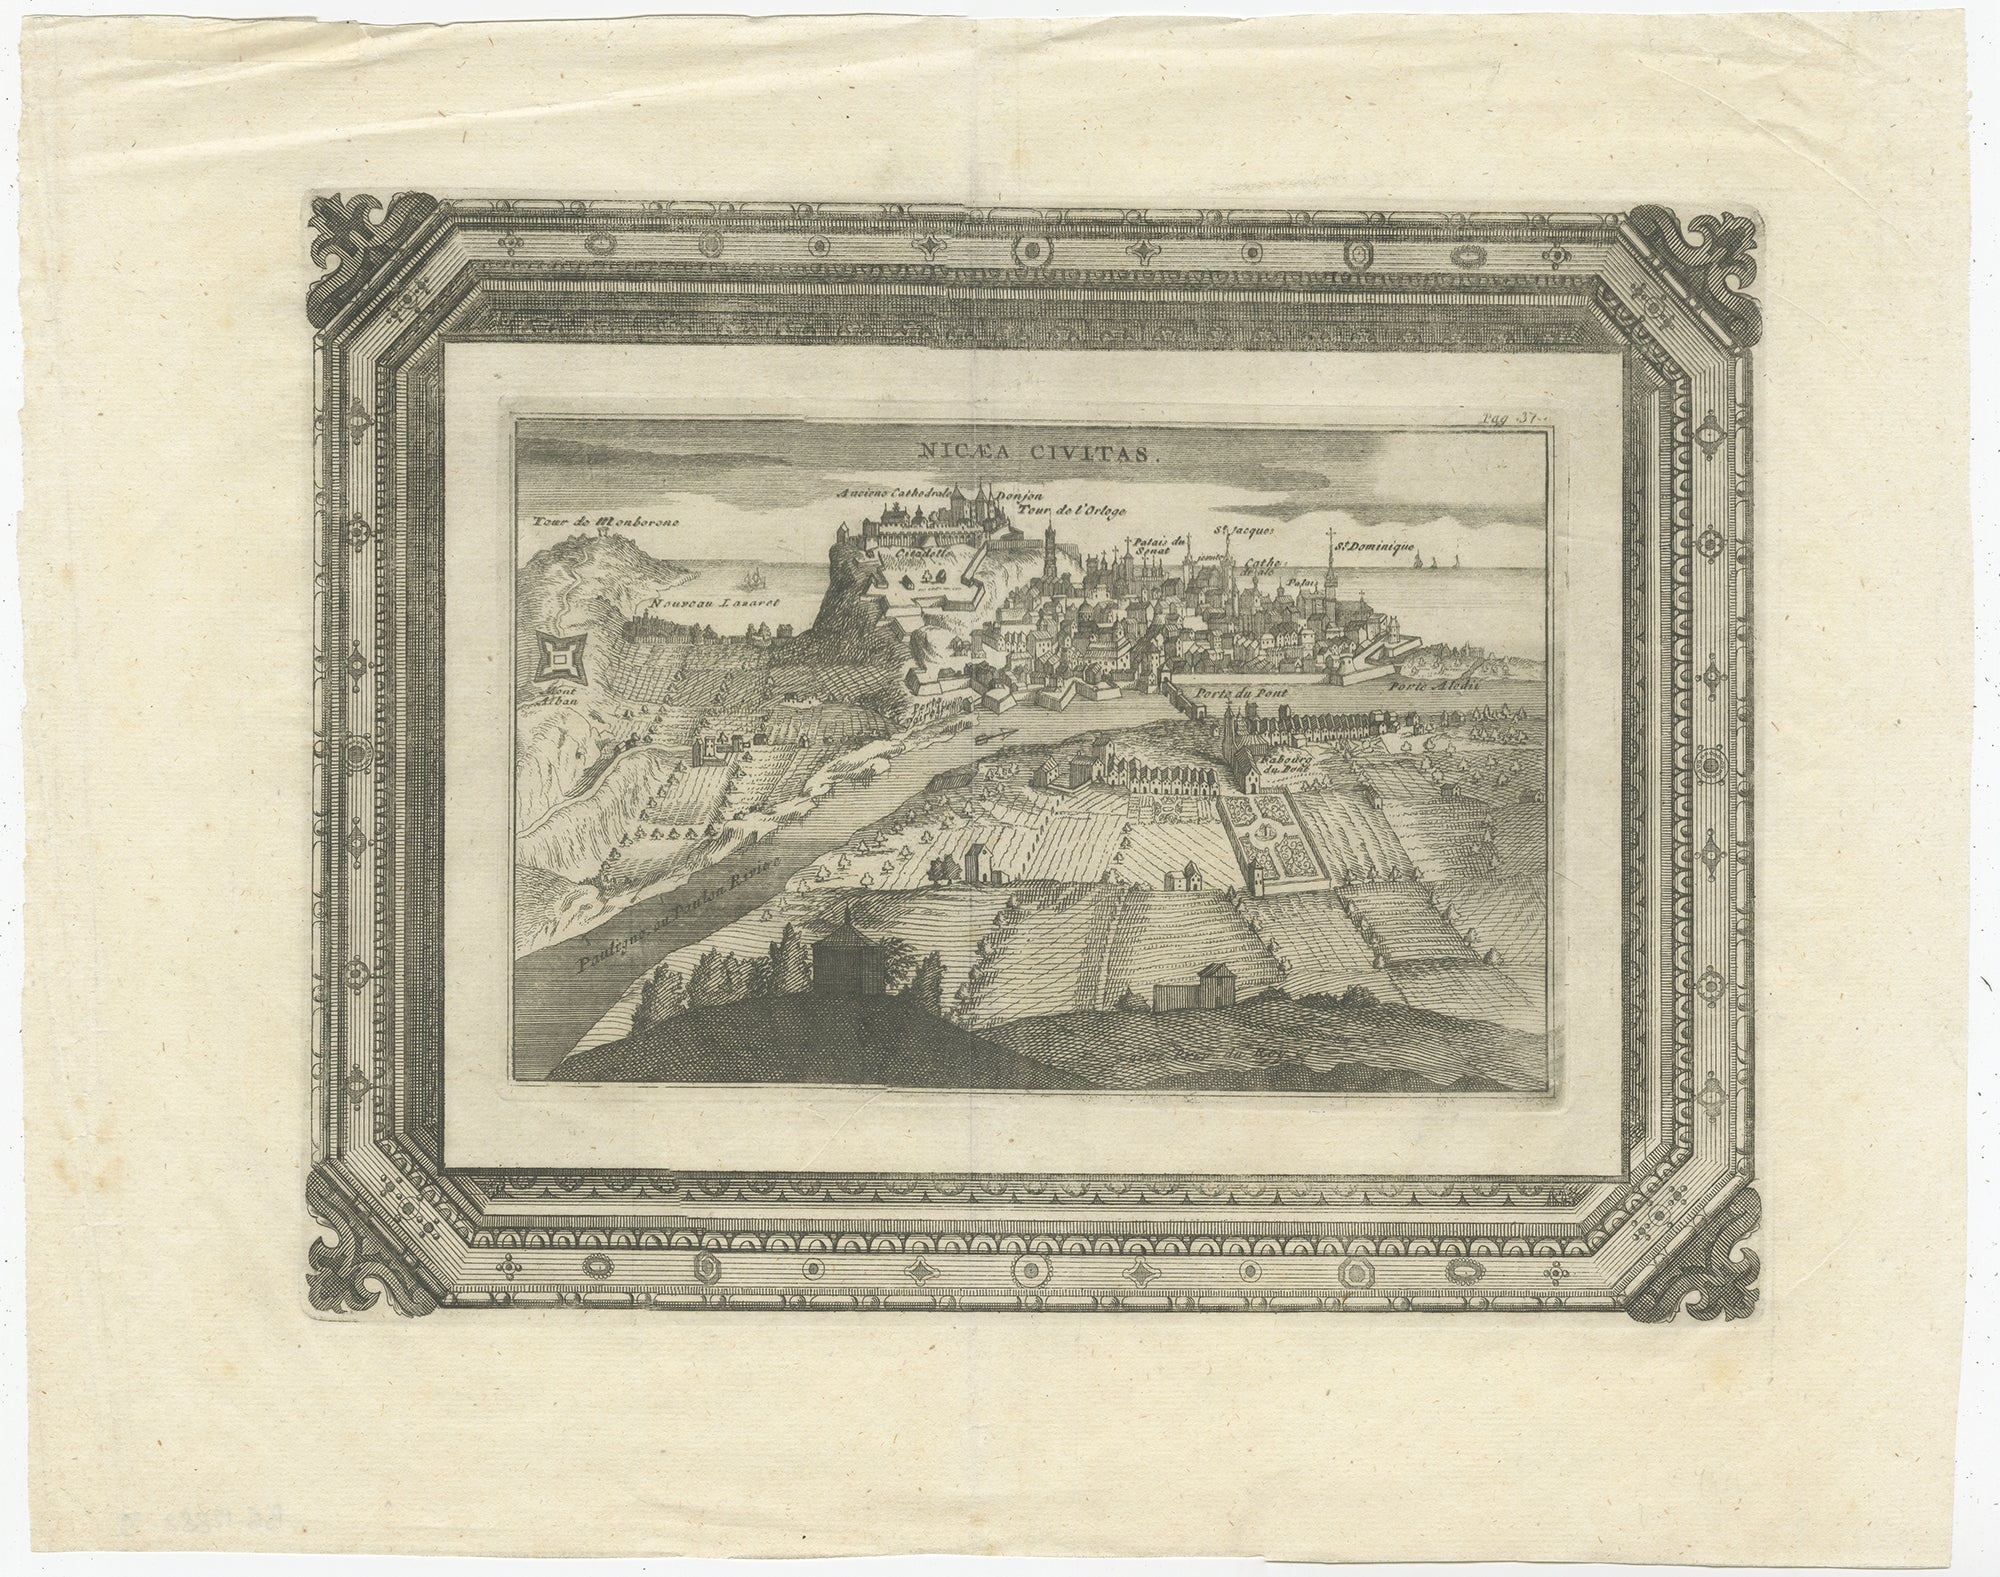 Antique print titled 'Nicaea Civitas'. Original antique print with a view of the city of Nice, France. Rare in this edition. Source unknown, to be determined.

Artists and Engravers: Anonymous.

Condition: Fair/good, general age-related toning.